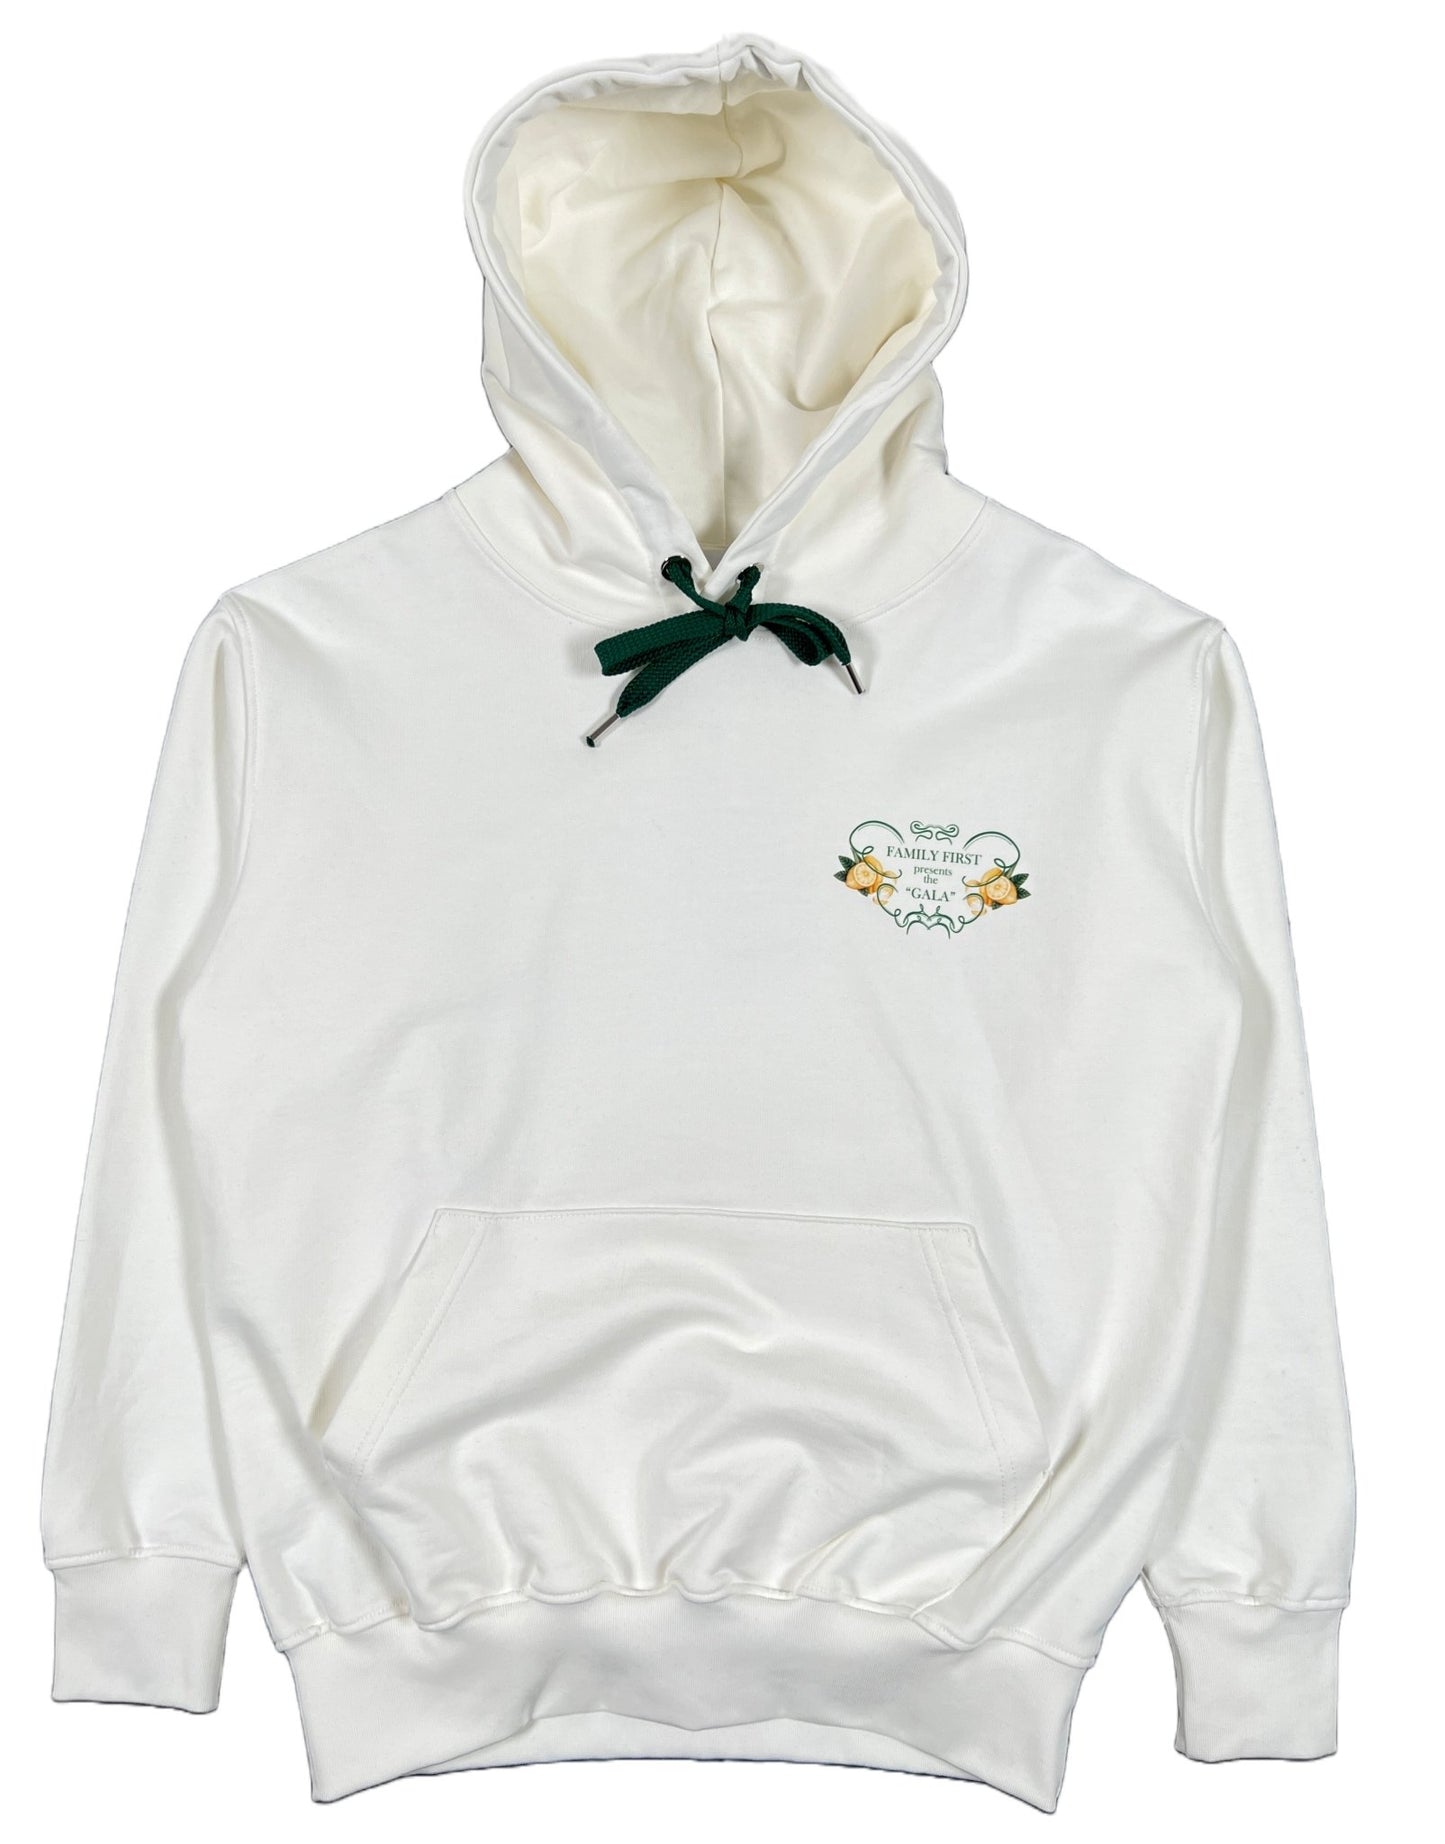 A FAMILY FIRST HS2319 HOODIE GALA WHITE with a green ribbon on it, Made In Italy.